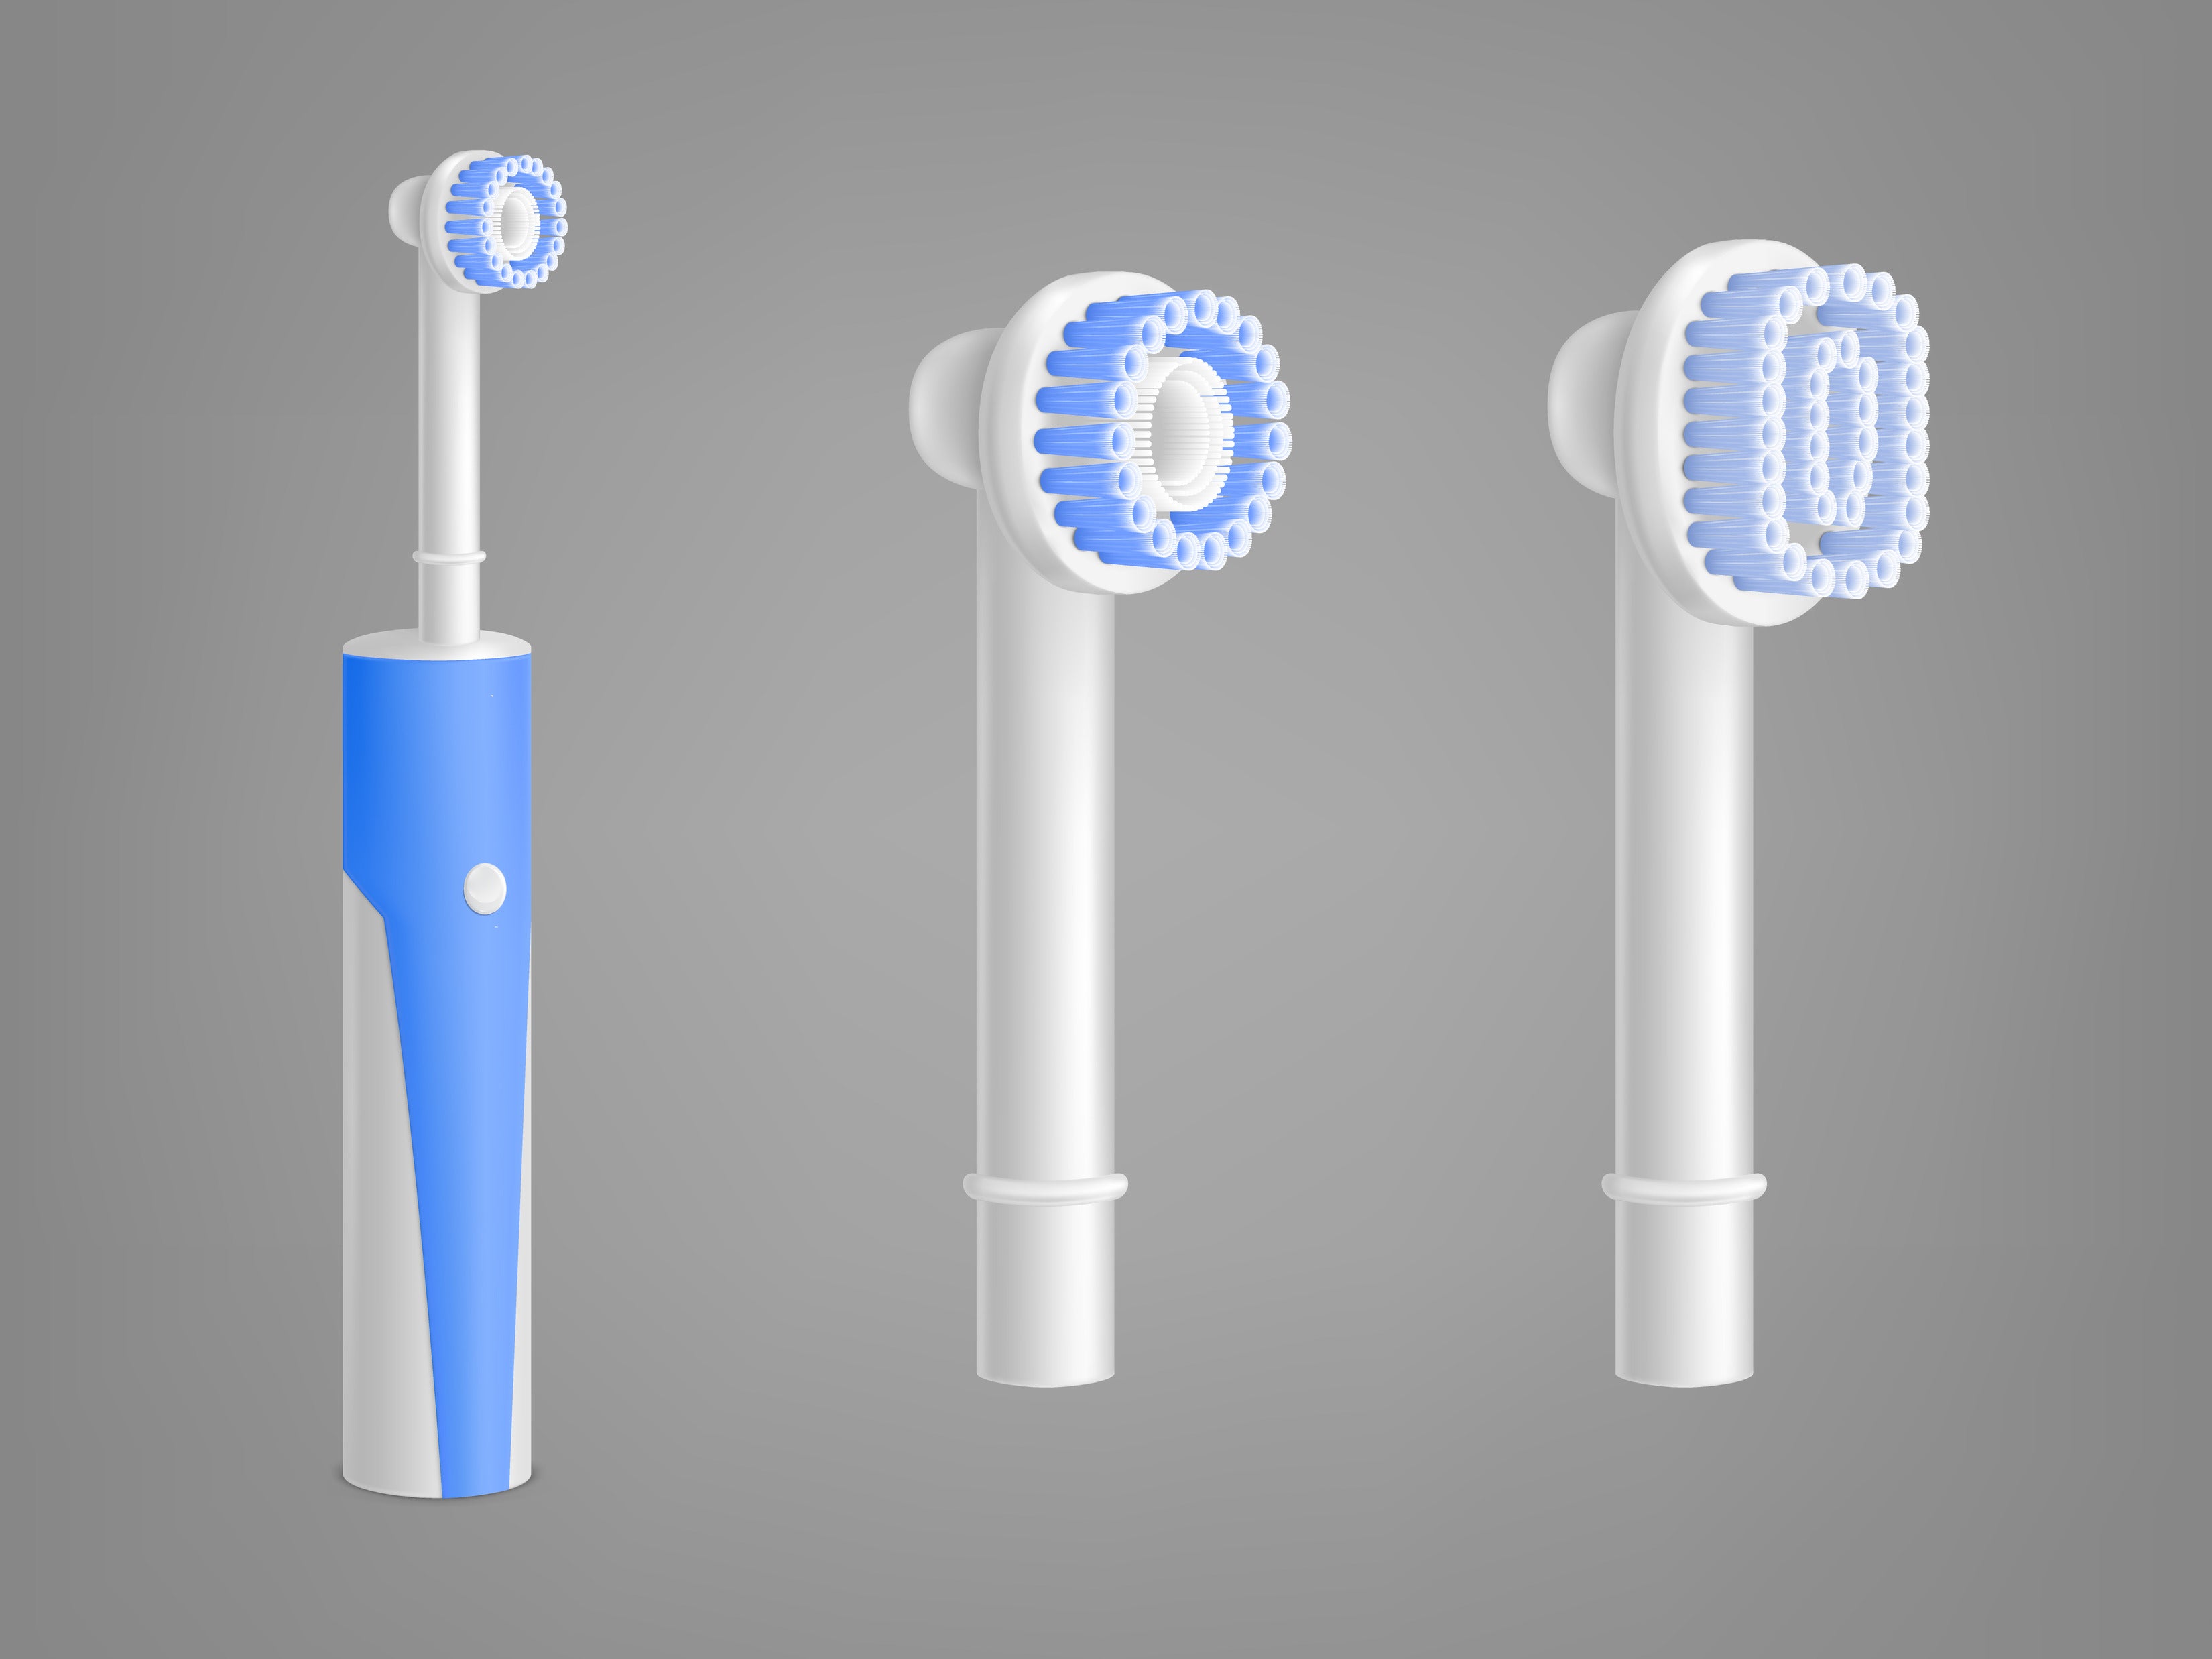 Testing and Ranking the Best Oral-B Electric Toothbrushes